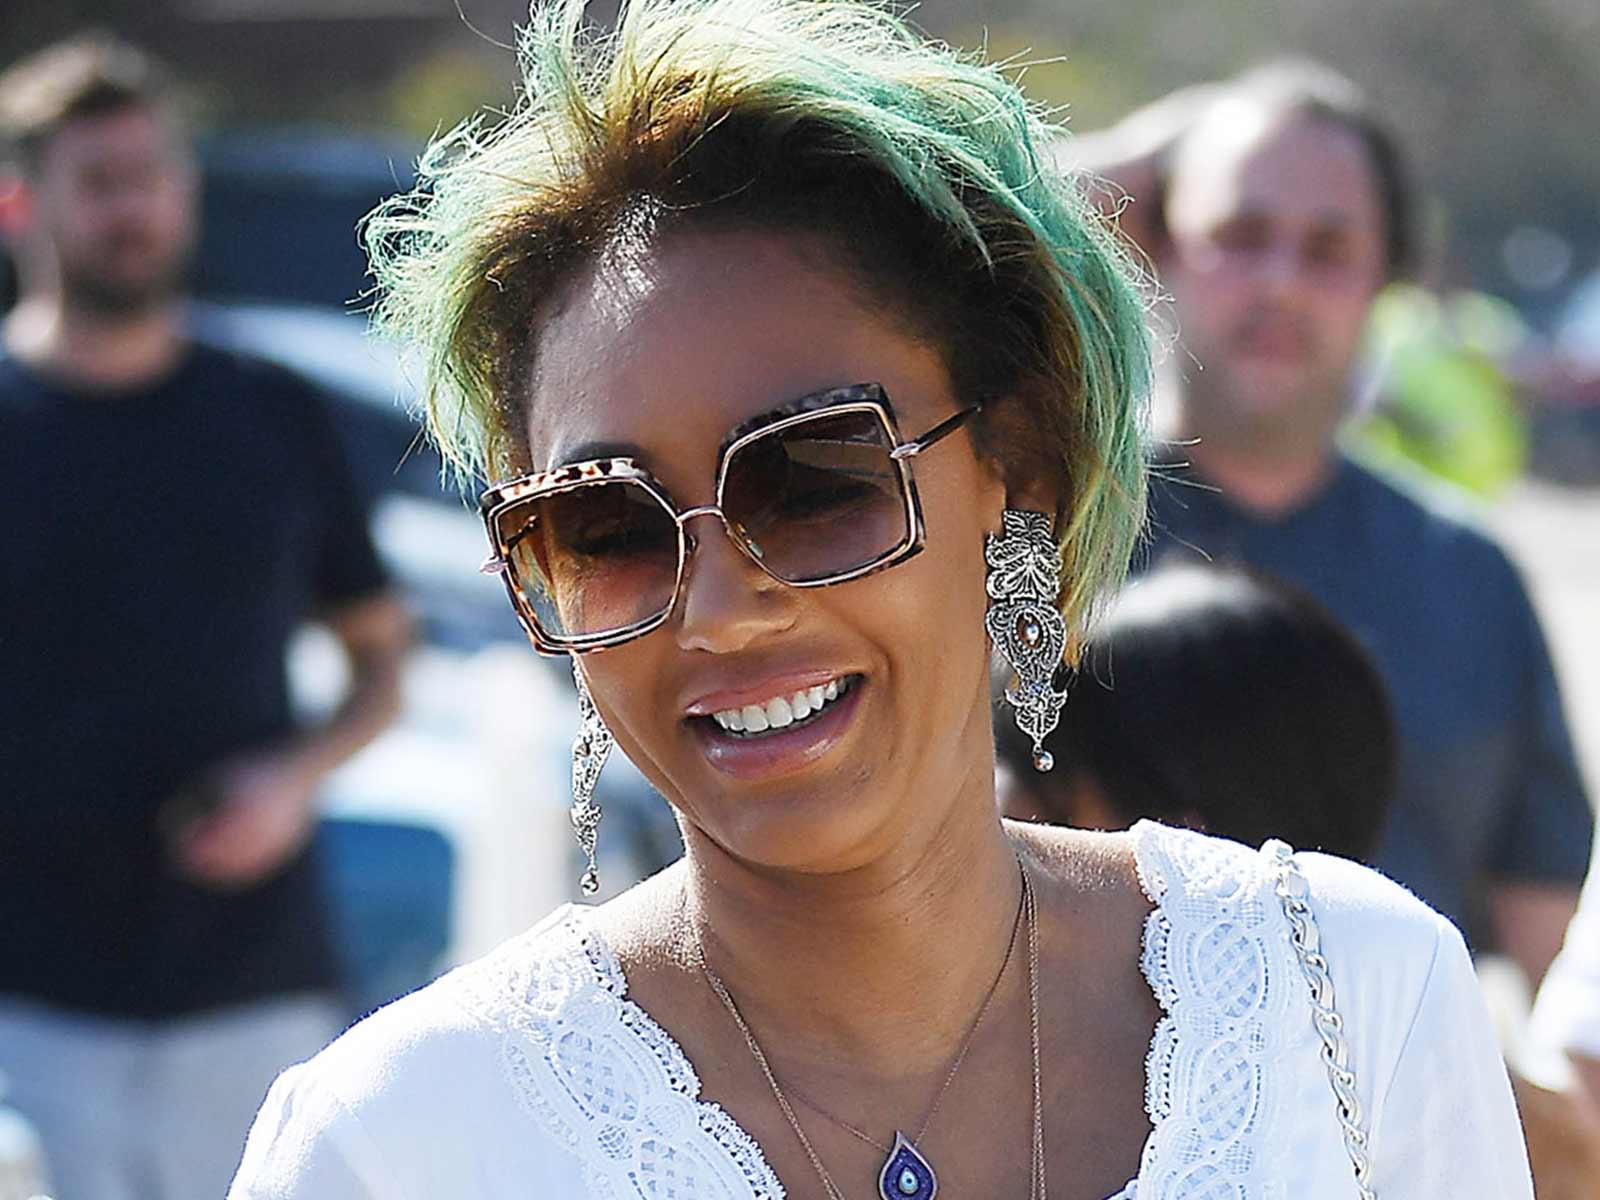 Mel B Denies She Has an Alcohol Problem, Offers to Submit to Drug Testing